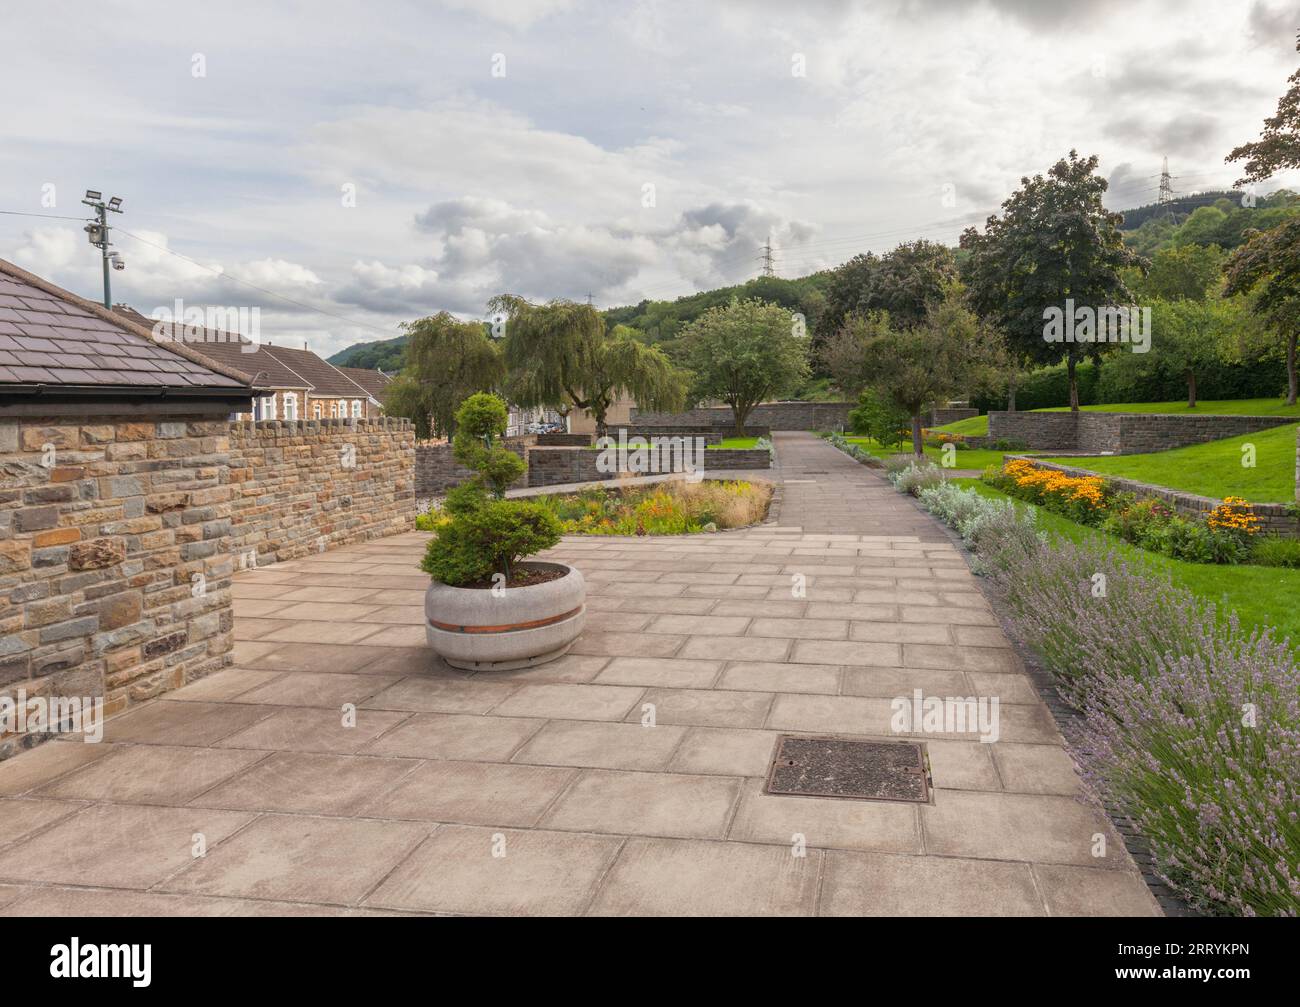 Pantglas junior school memorial garden, Aberfan, south Wales, memorial to the victims of the Aberfan disaster Stock Photo